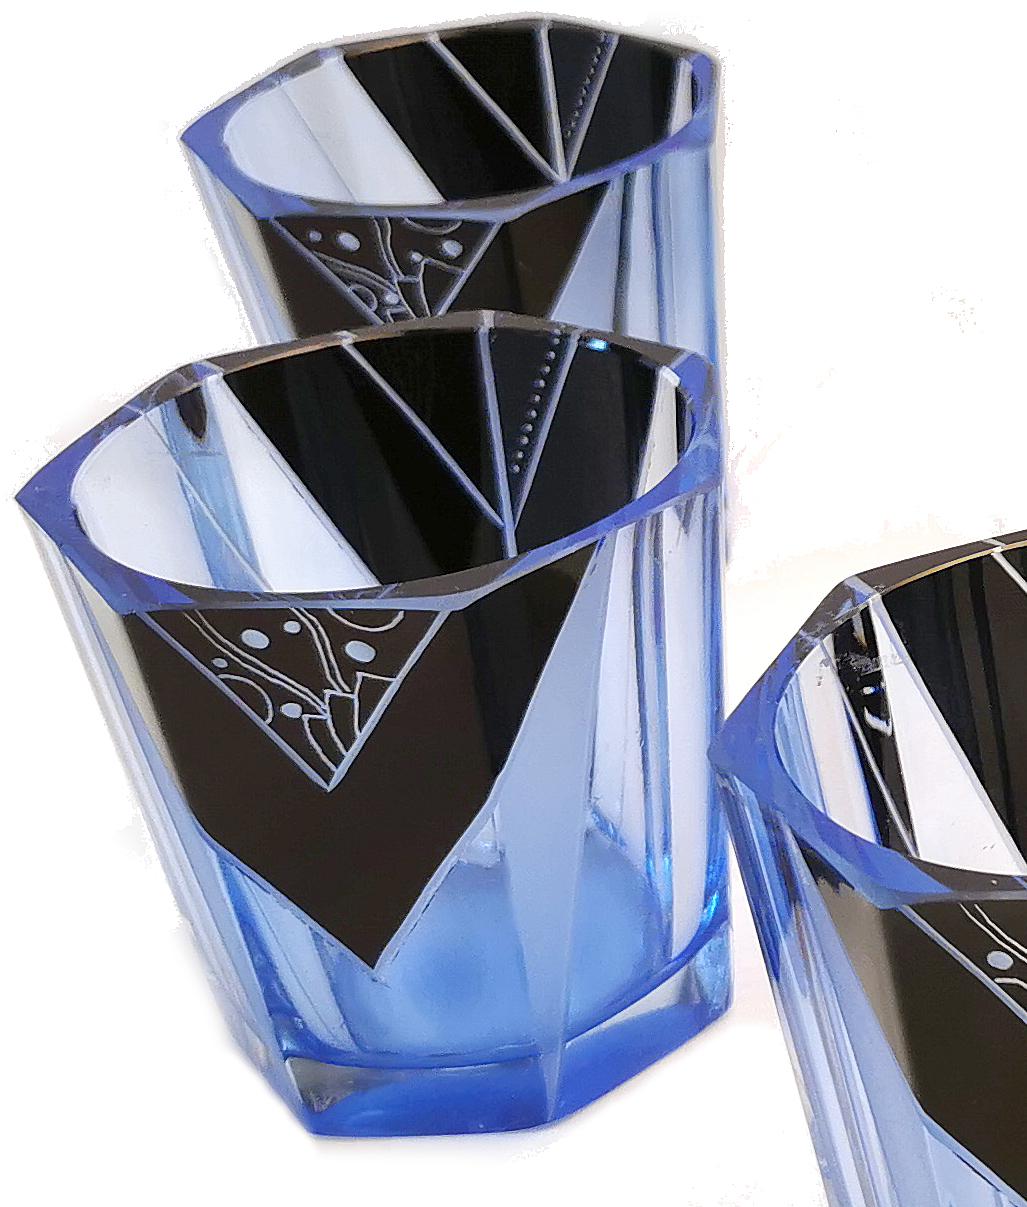 Beautiful Art Deco blue and black decanter set, a wonderful addition to a barware collection. Originating from Czech Republic this striking set has a very desirable geometric pattern with blue glass and black overlay enamel decoration. No chips,